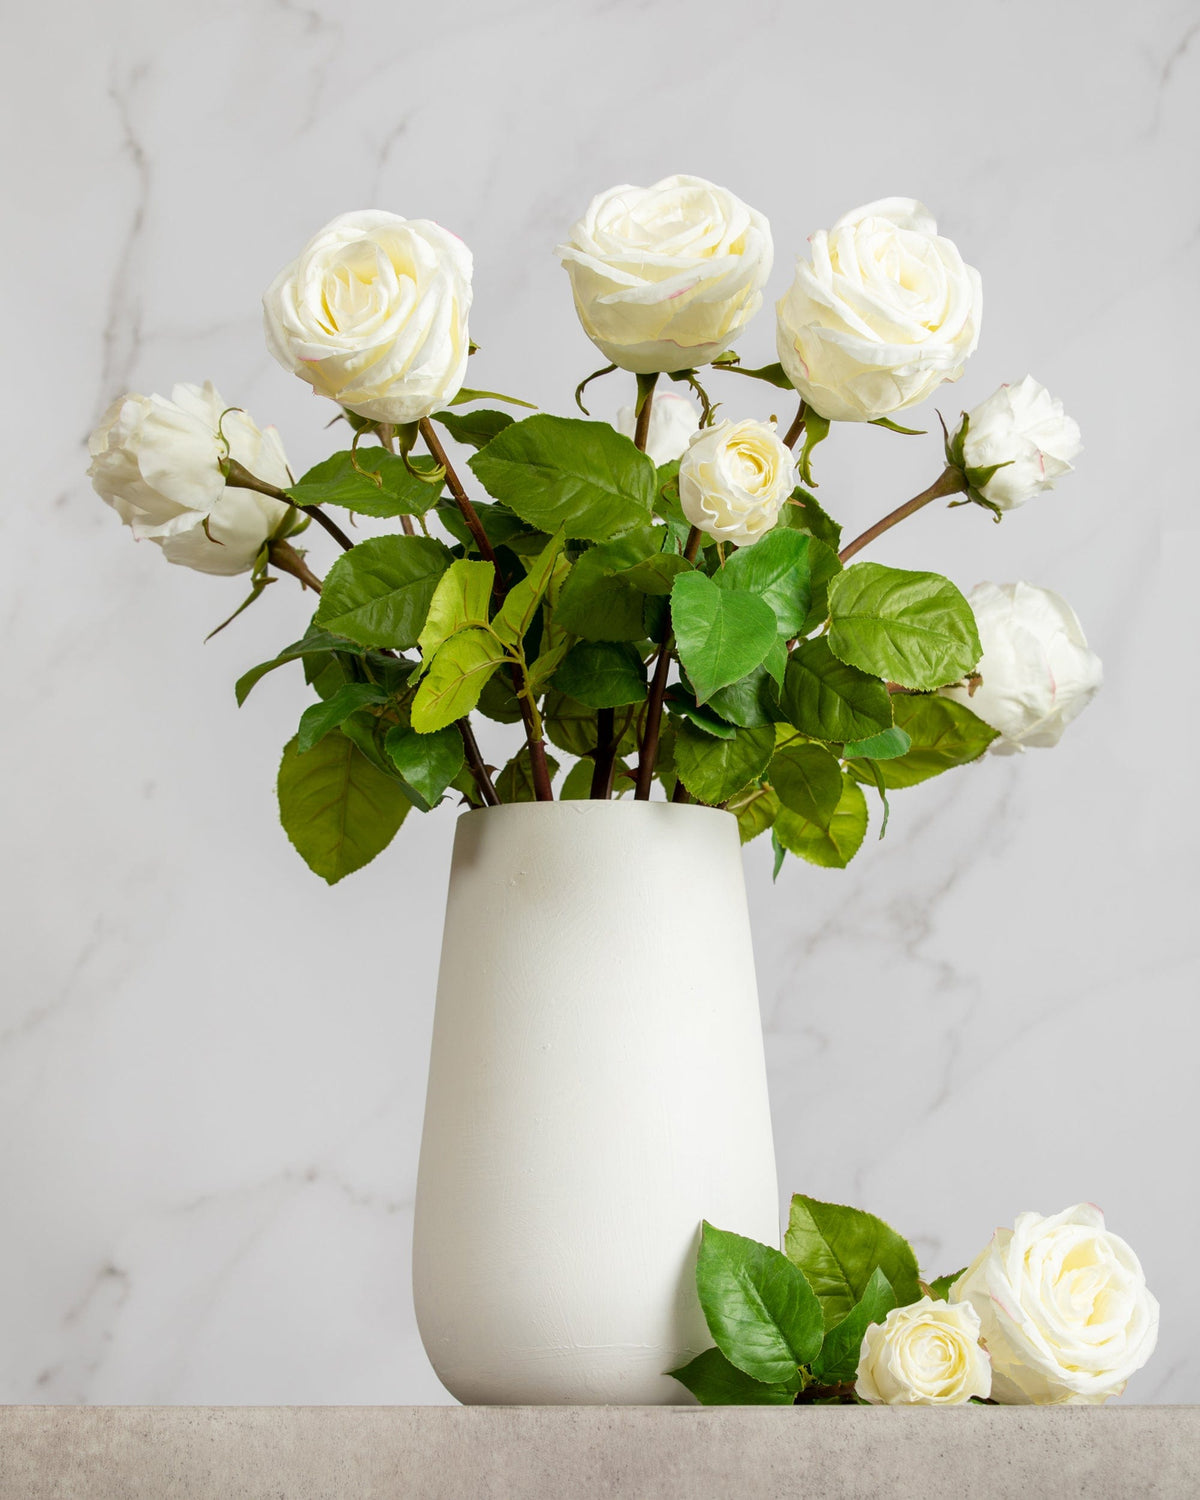 Prestige Botanicals Artificial White Duchess Rose Buds and full bloom white roses in a white vase